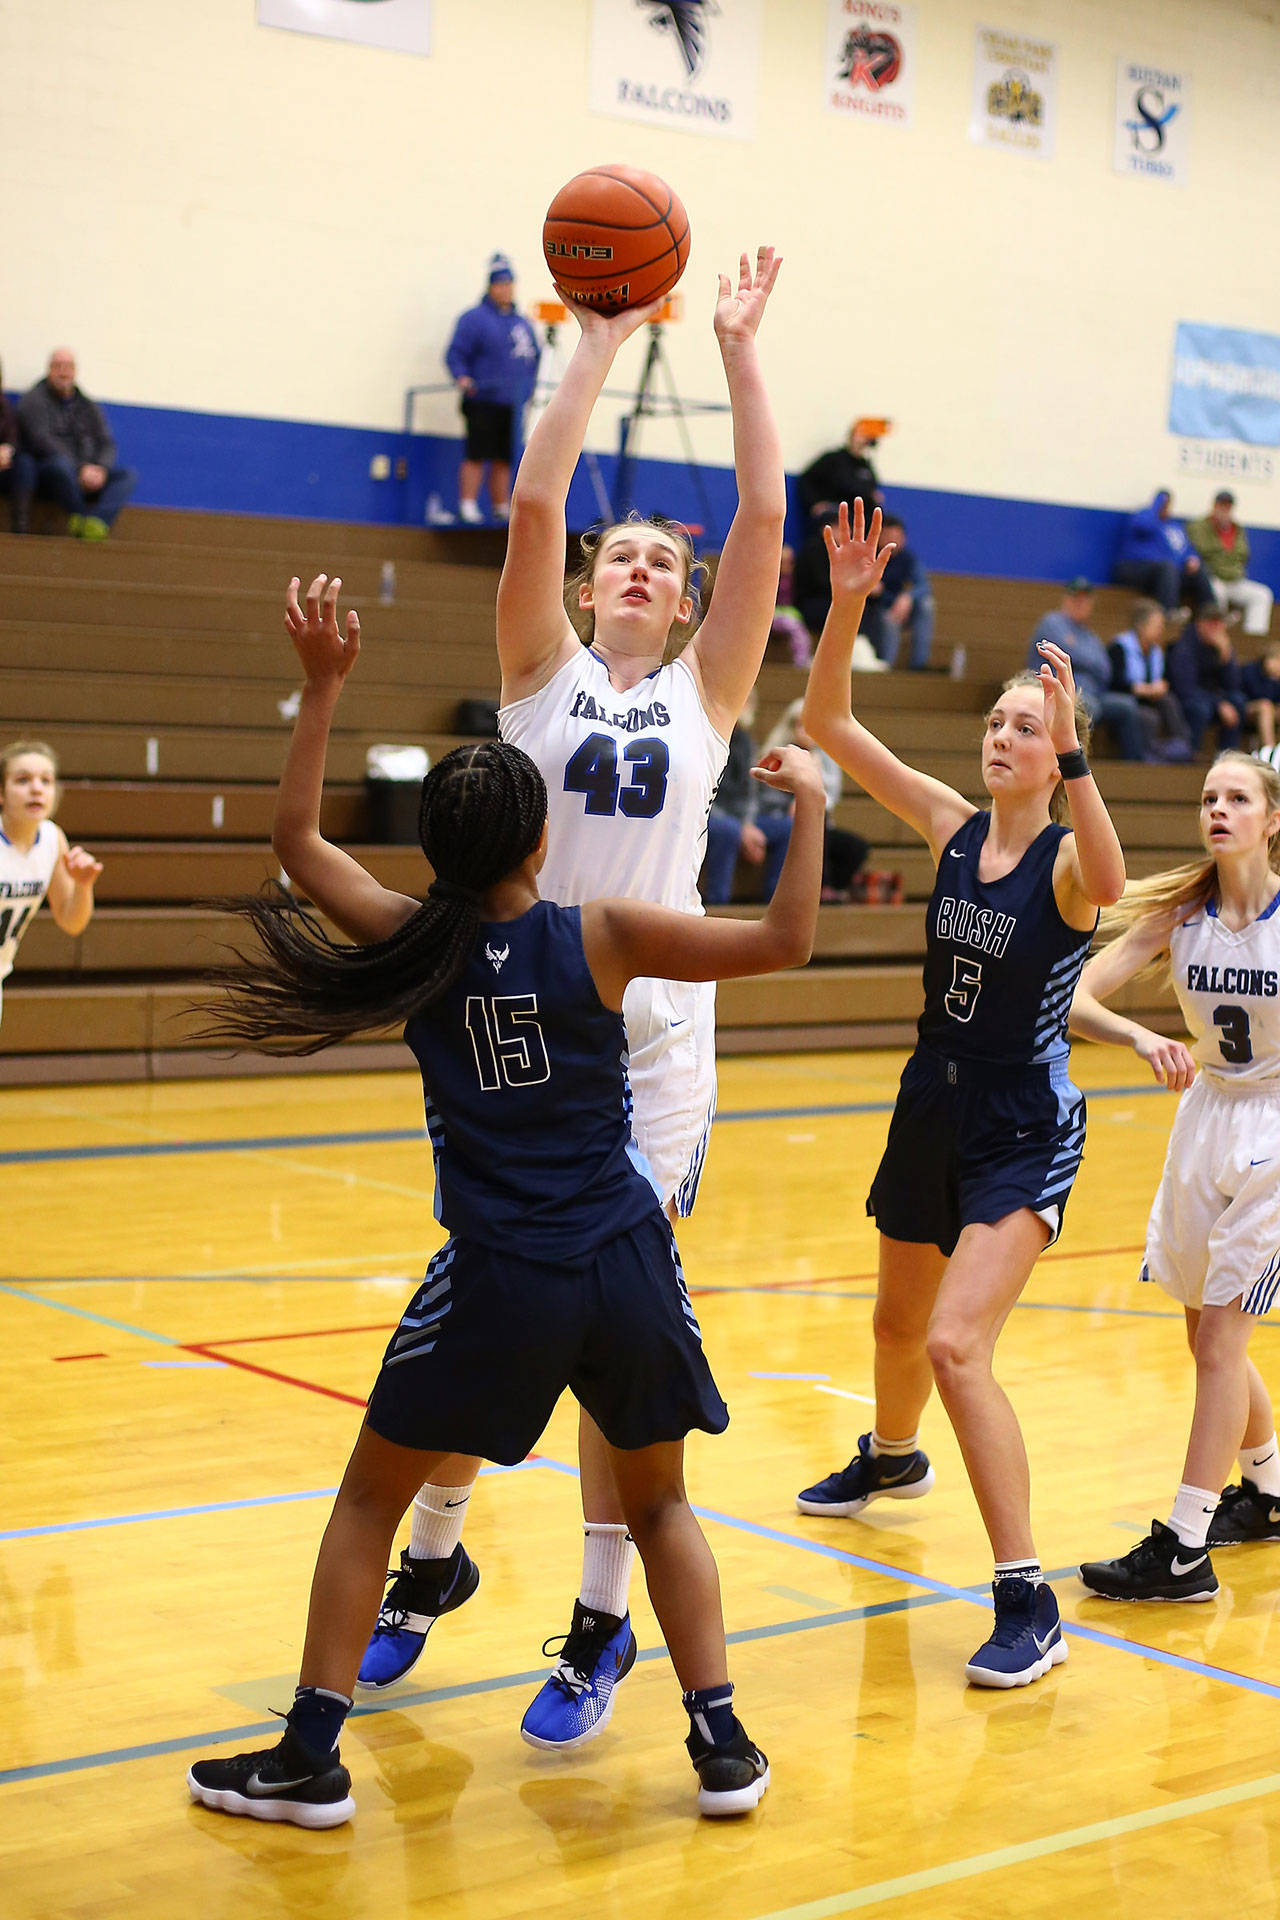 South Whidbey freshman Isabelle Wood was a first-team, all-North Sound Conference selection in girls basketball last season. (File photo)